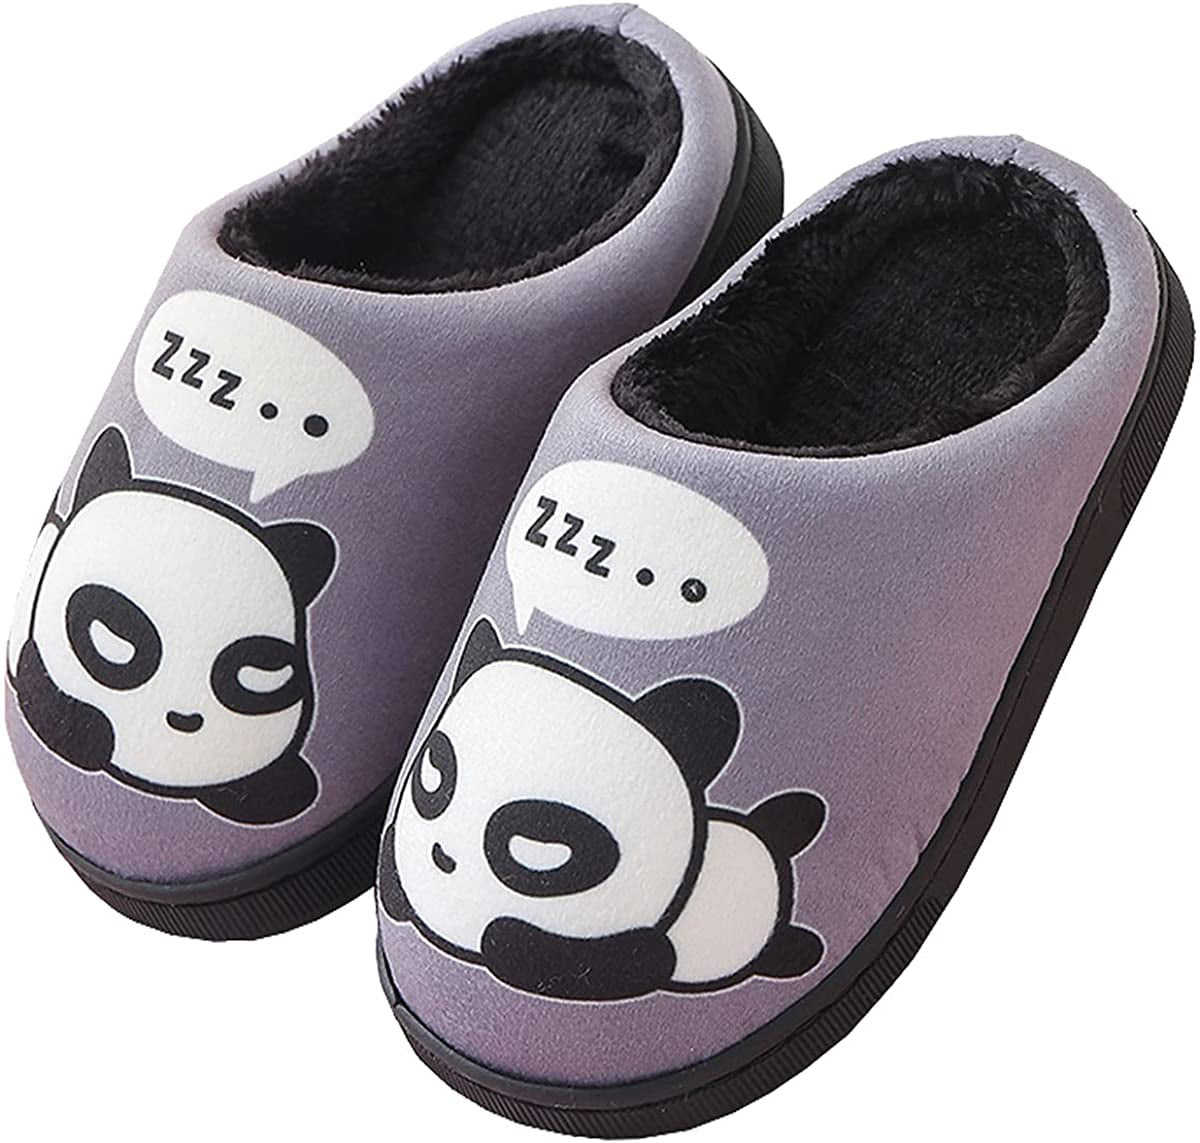 panda soft slippers for girls or boys Shoes Girls Shoes Slippers 